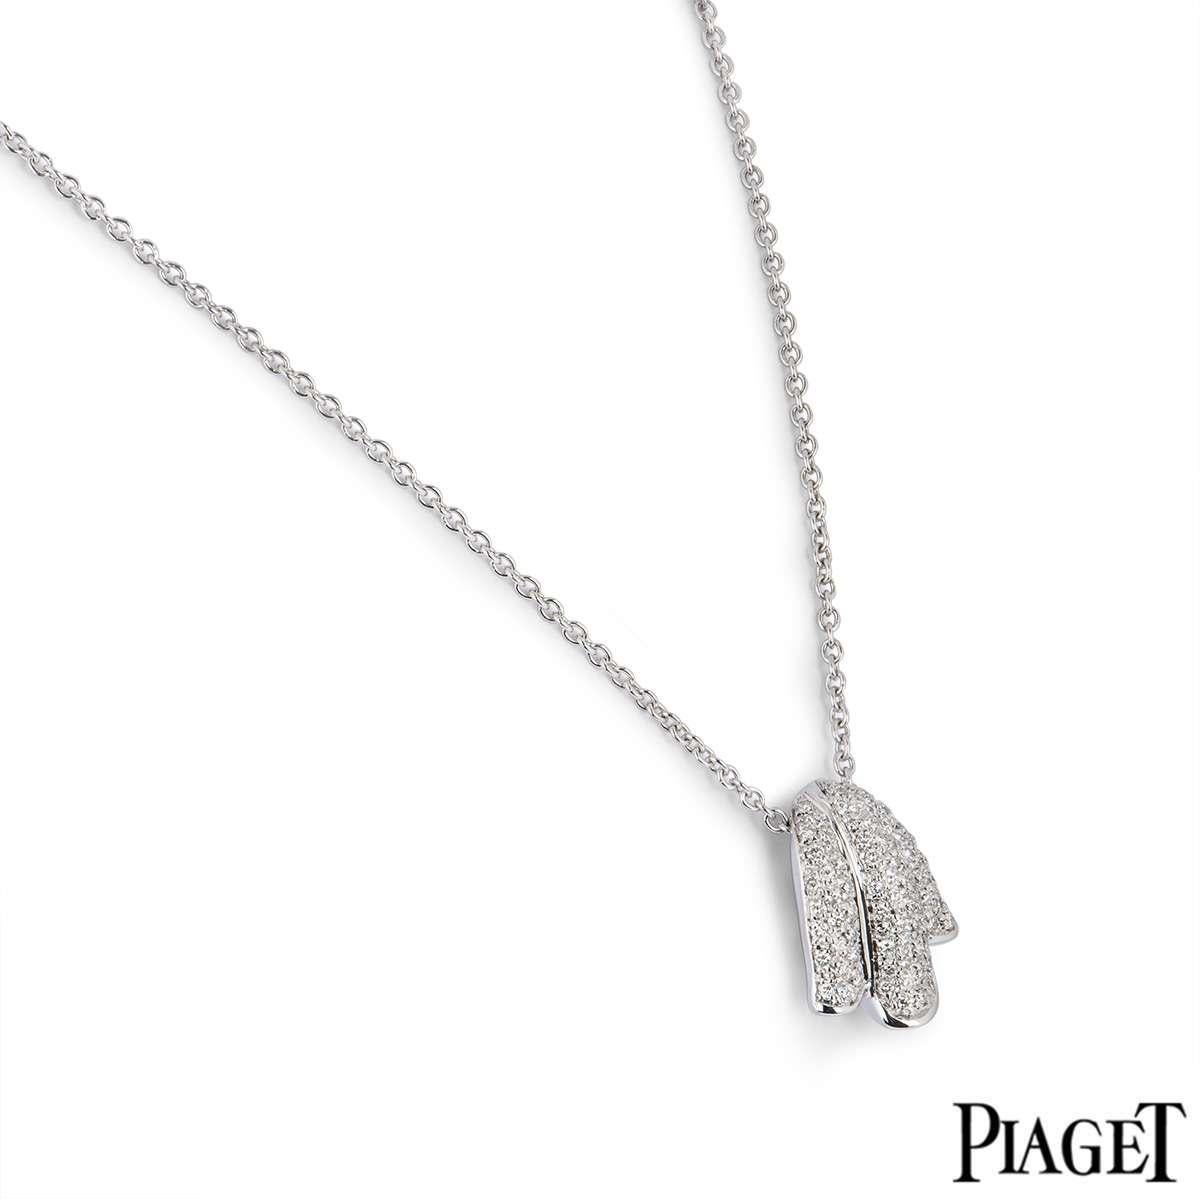 A beautiful earring and pendant suite by Piaget. The earrings and pendant feature a tulip design, pave set with round brilliant cut diamonds. The pendant motif measures 1.8cm in length and comes on a 16 inch chain, complete with lobster clasp. The